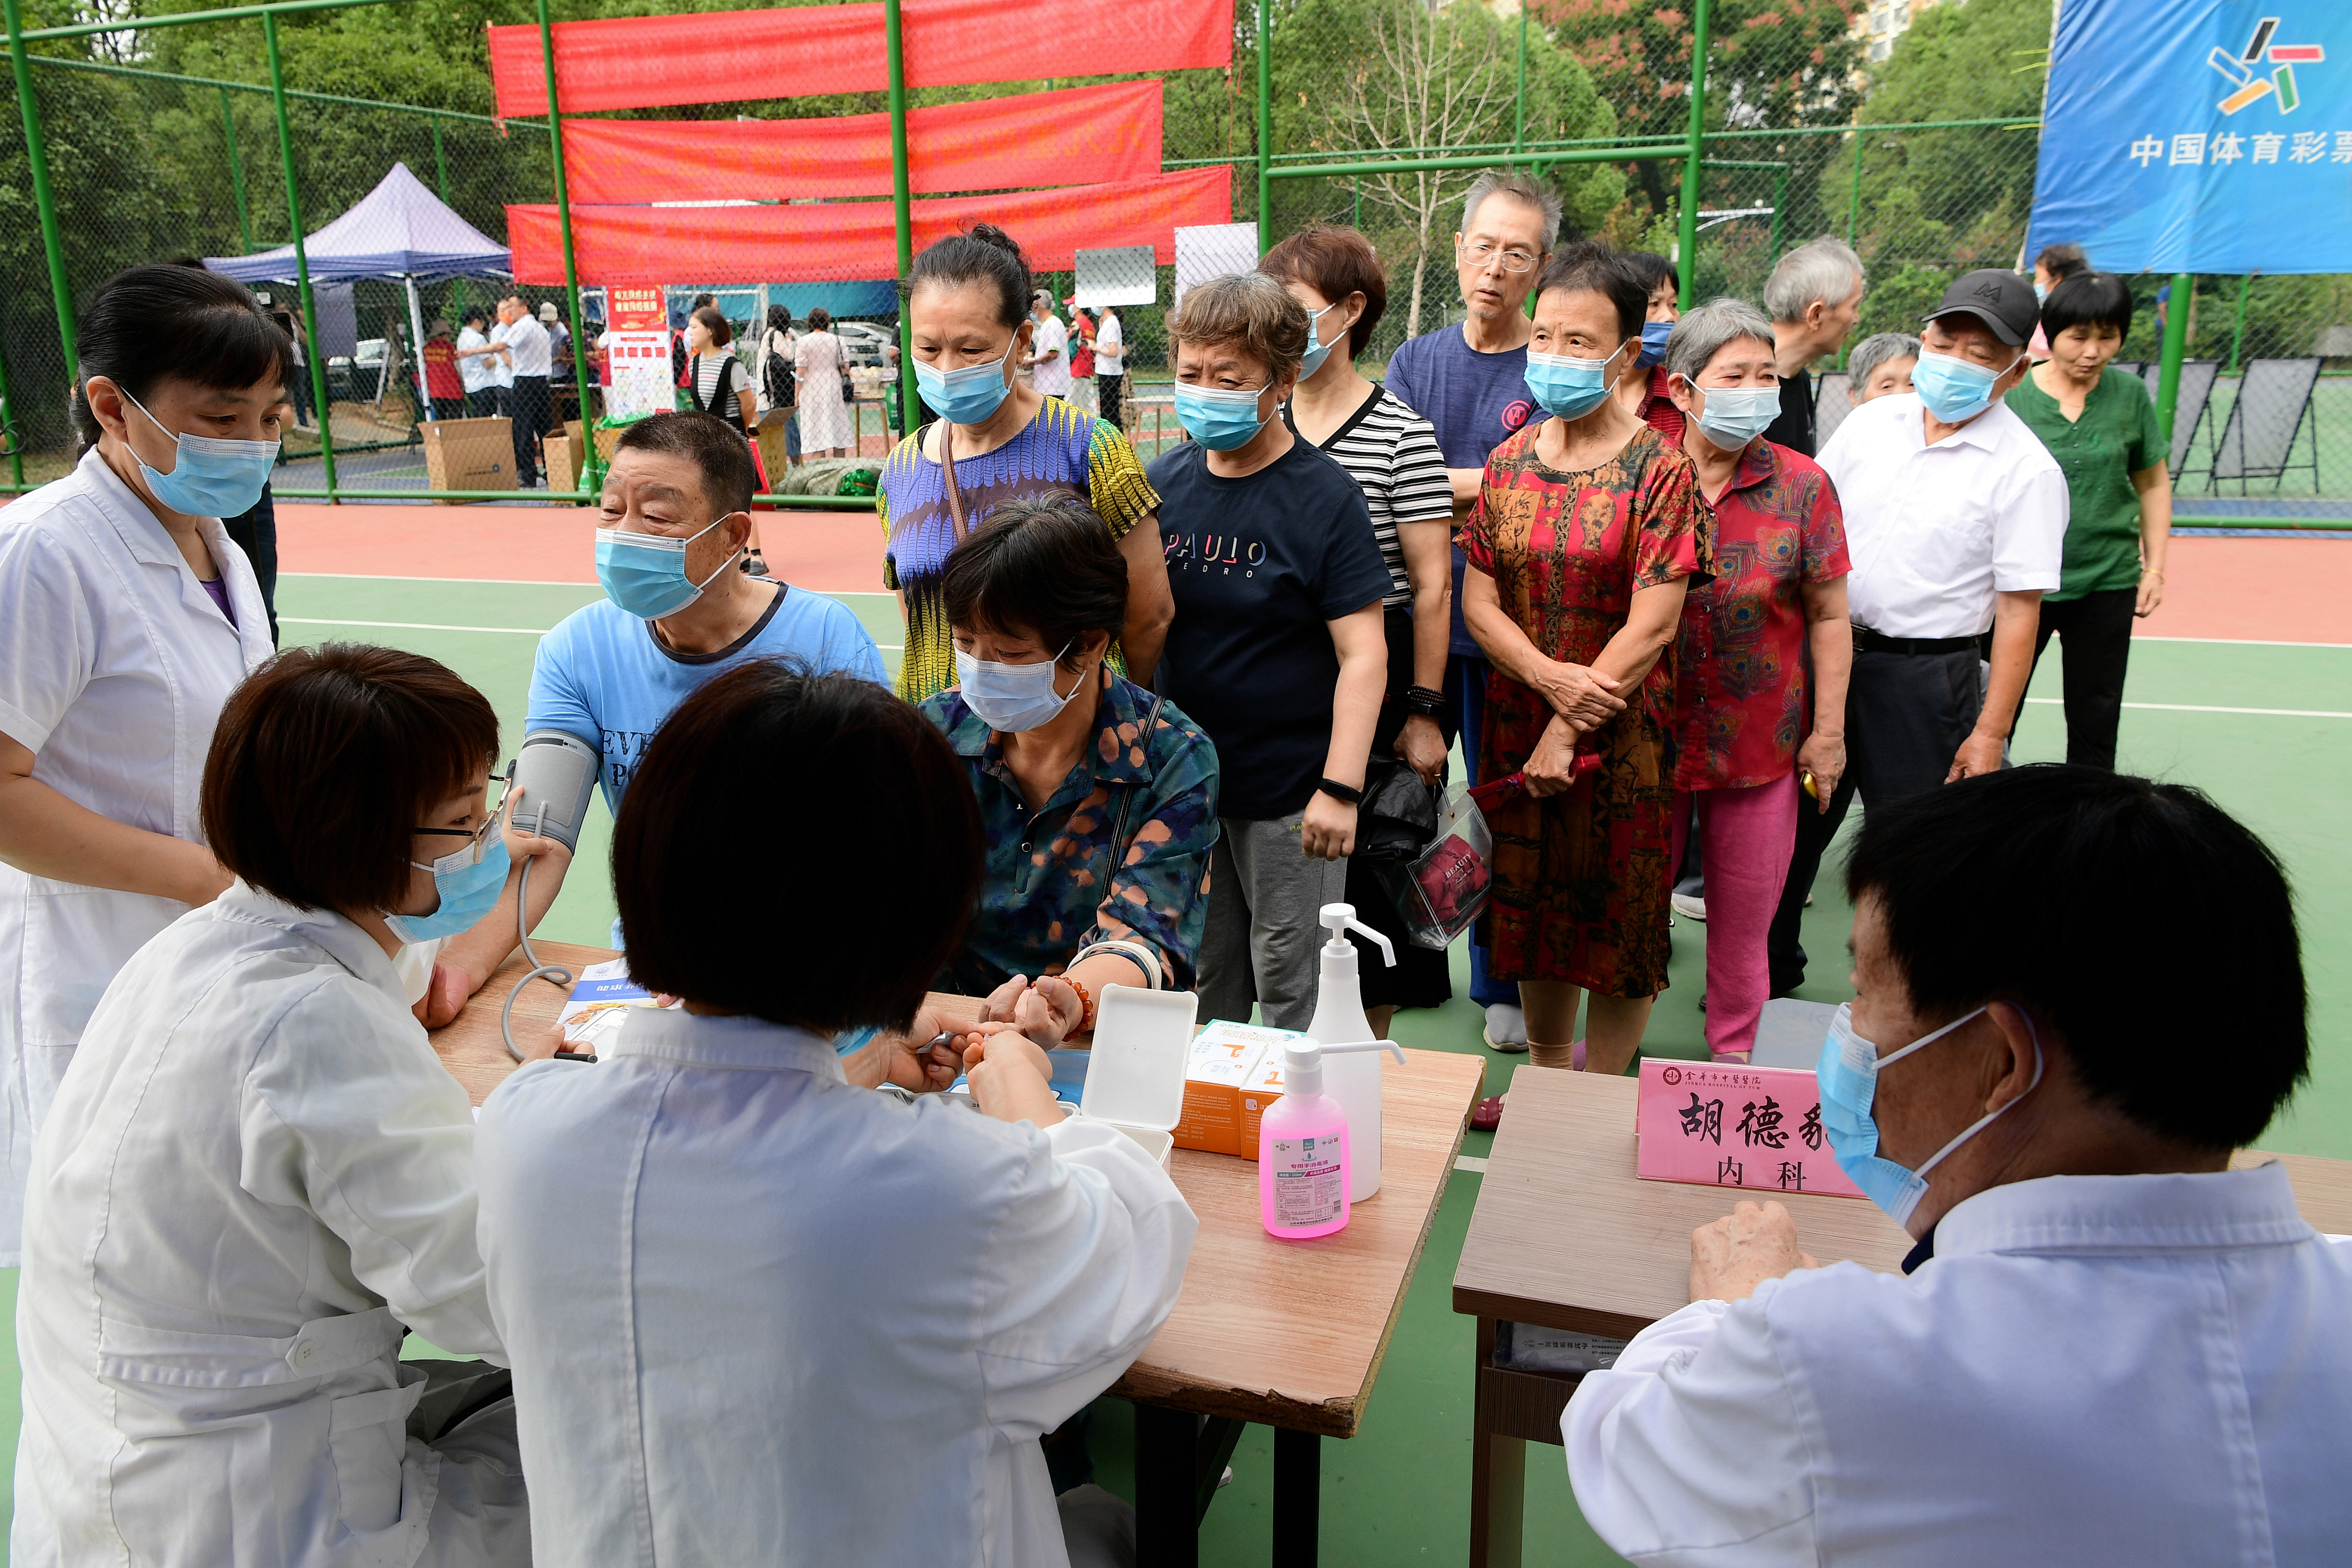 Older residents receive free medical treatment or health check-up at a community in Jinhua Development Zone, Zhejiang Province, China, September 28, 2022. /CFP